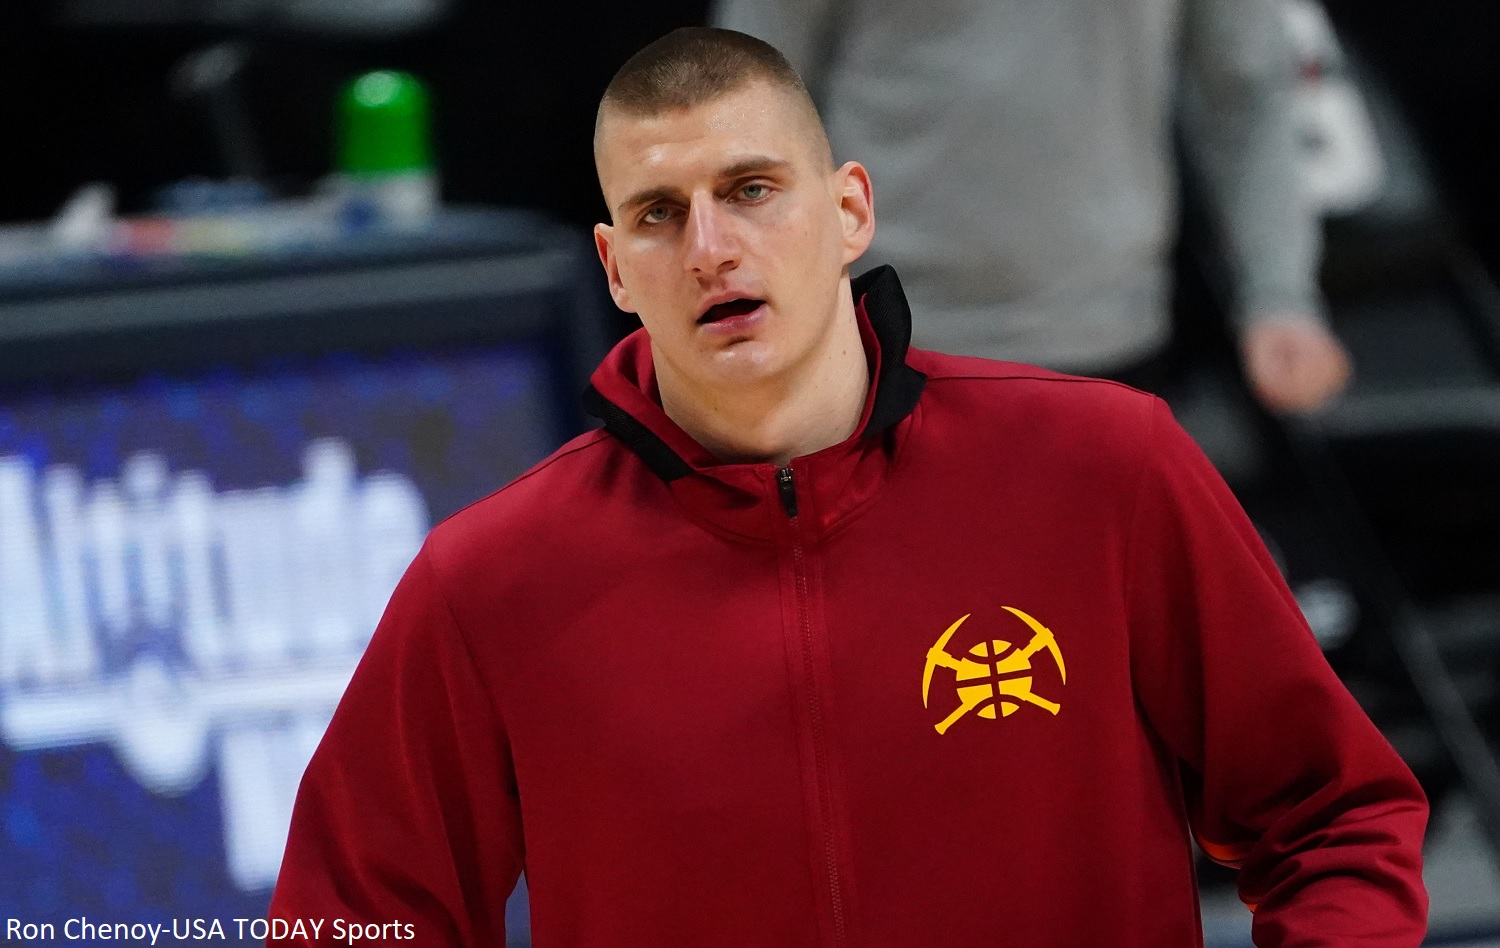 Nikola Jokic responds to Nuggets coach saying he is not ‘sexy’